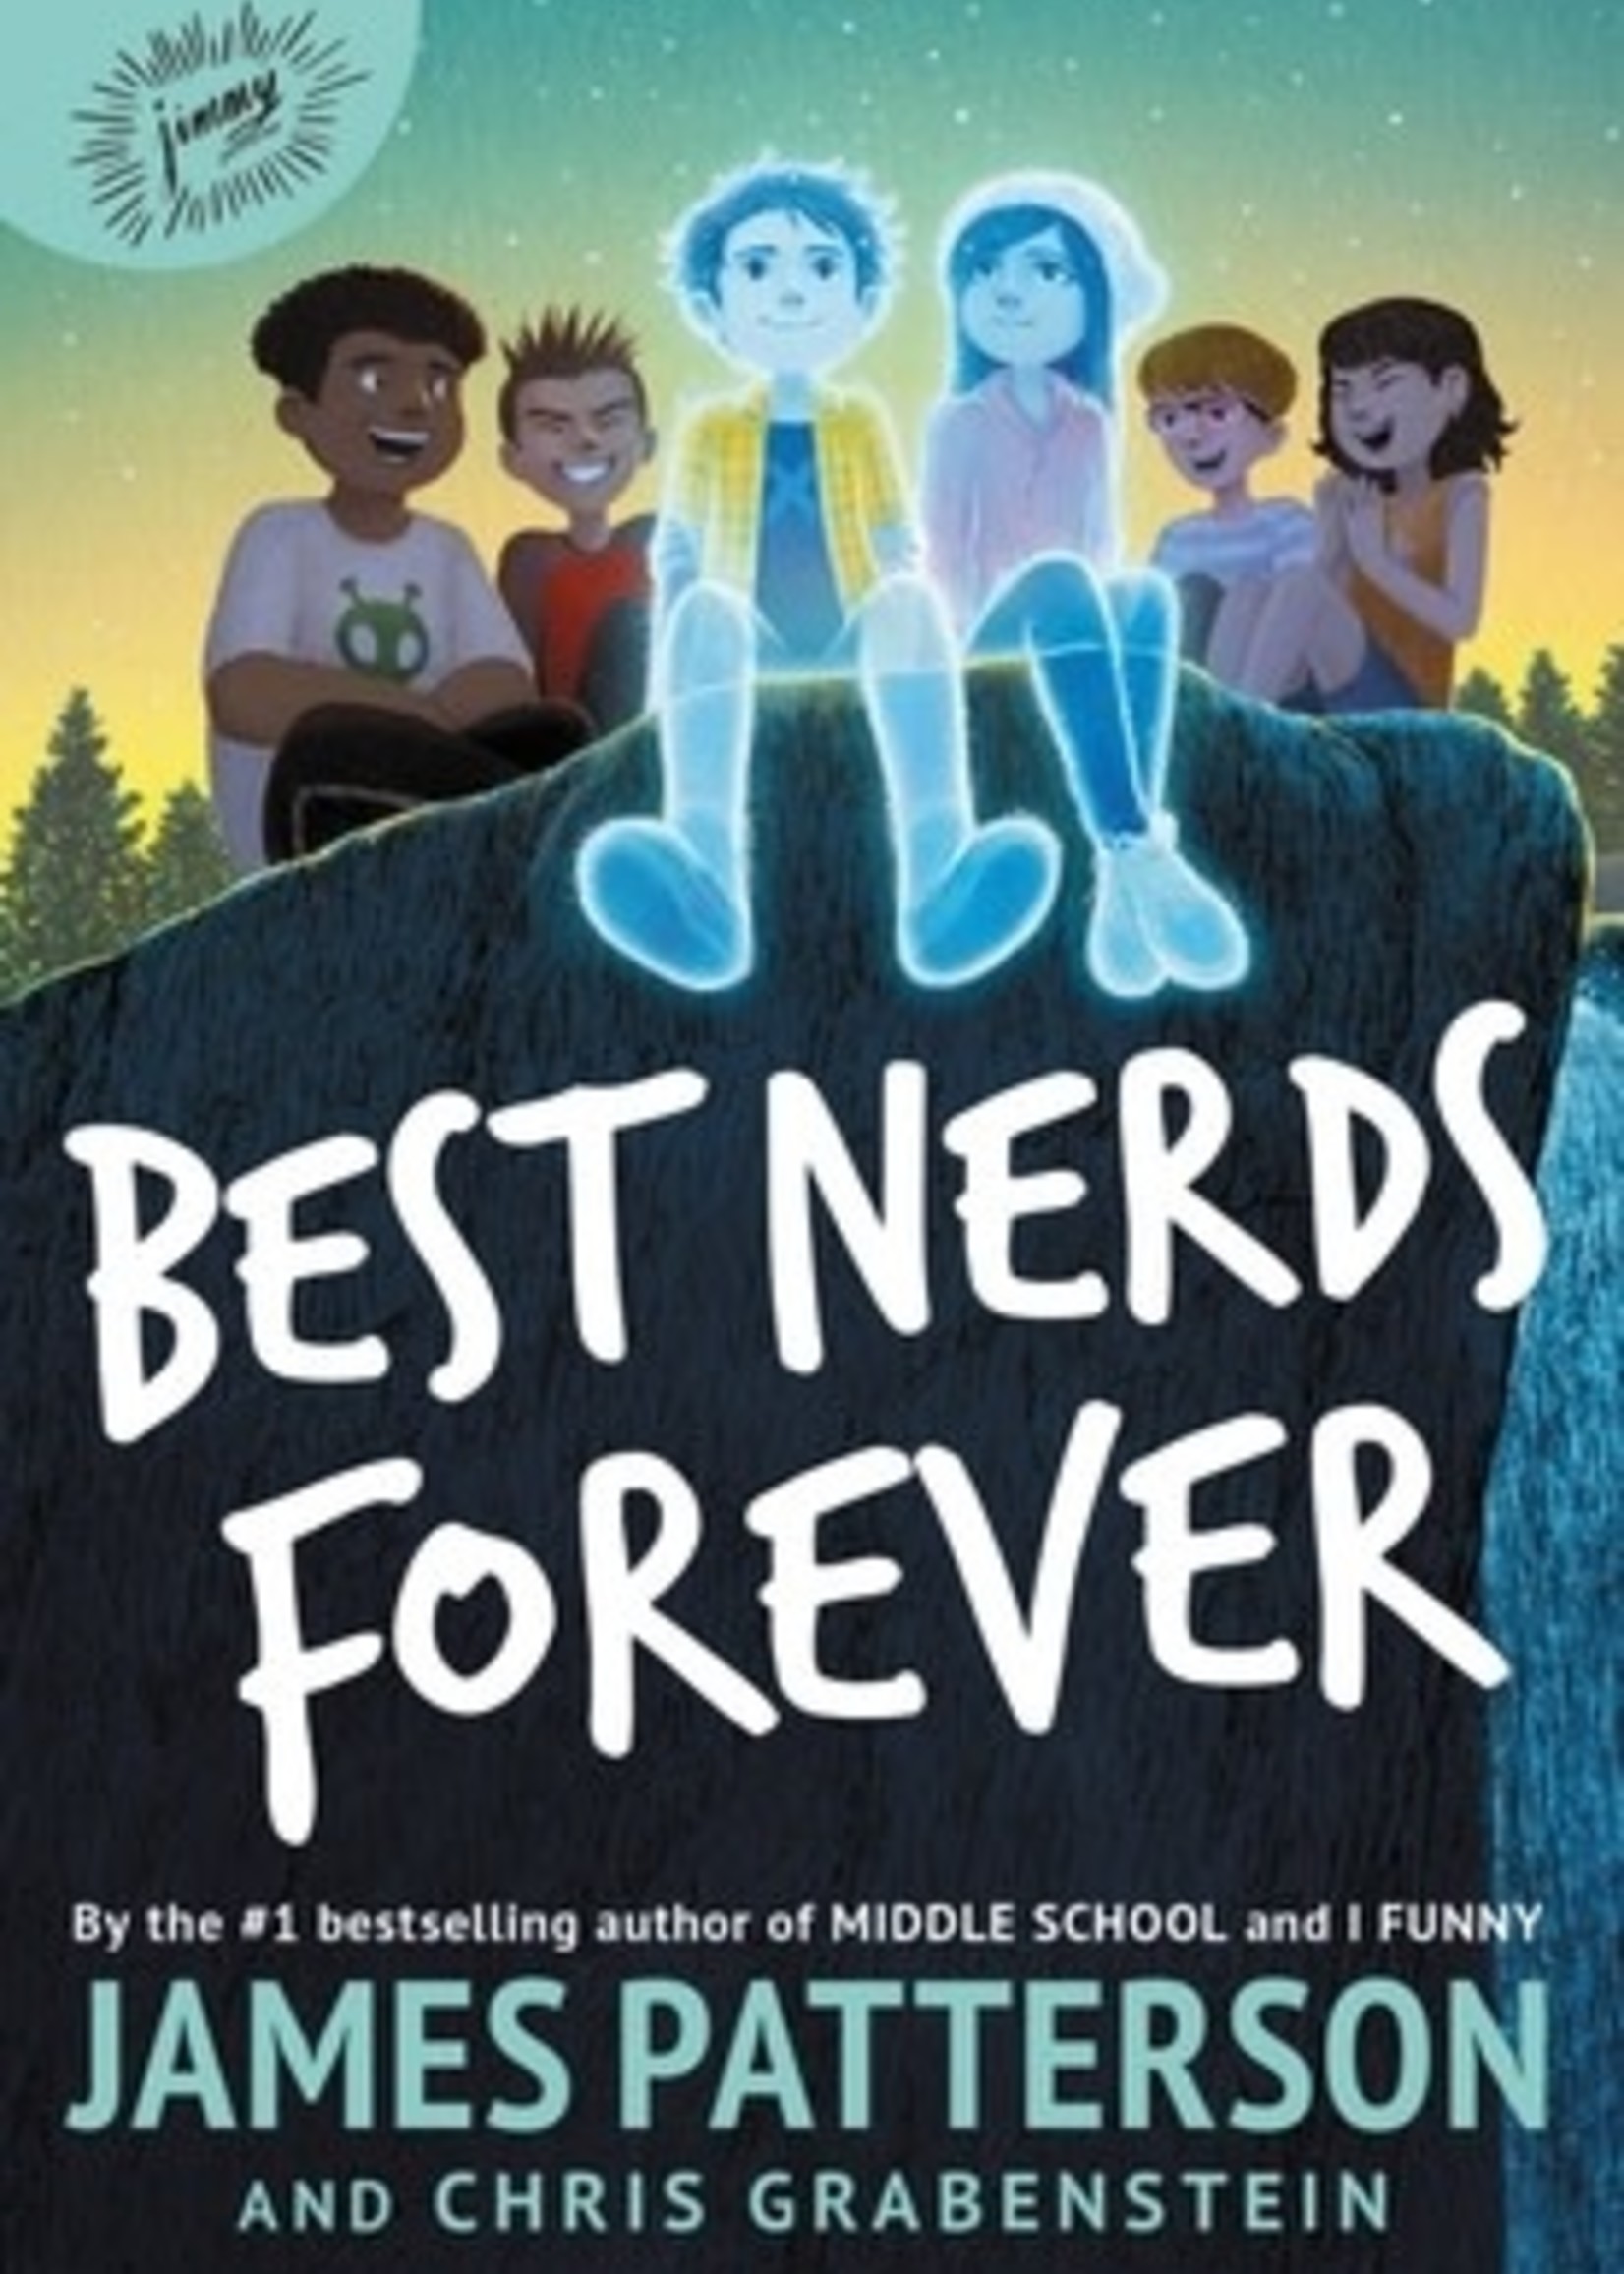 Best Nerds Forever by James Patterson